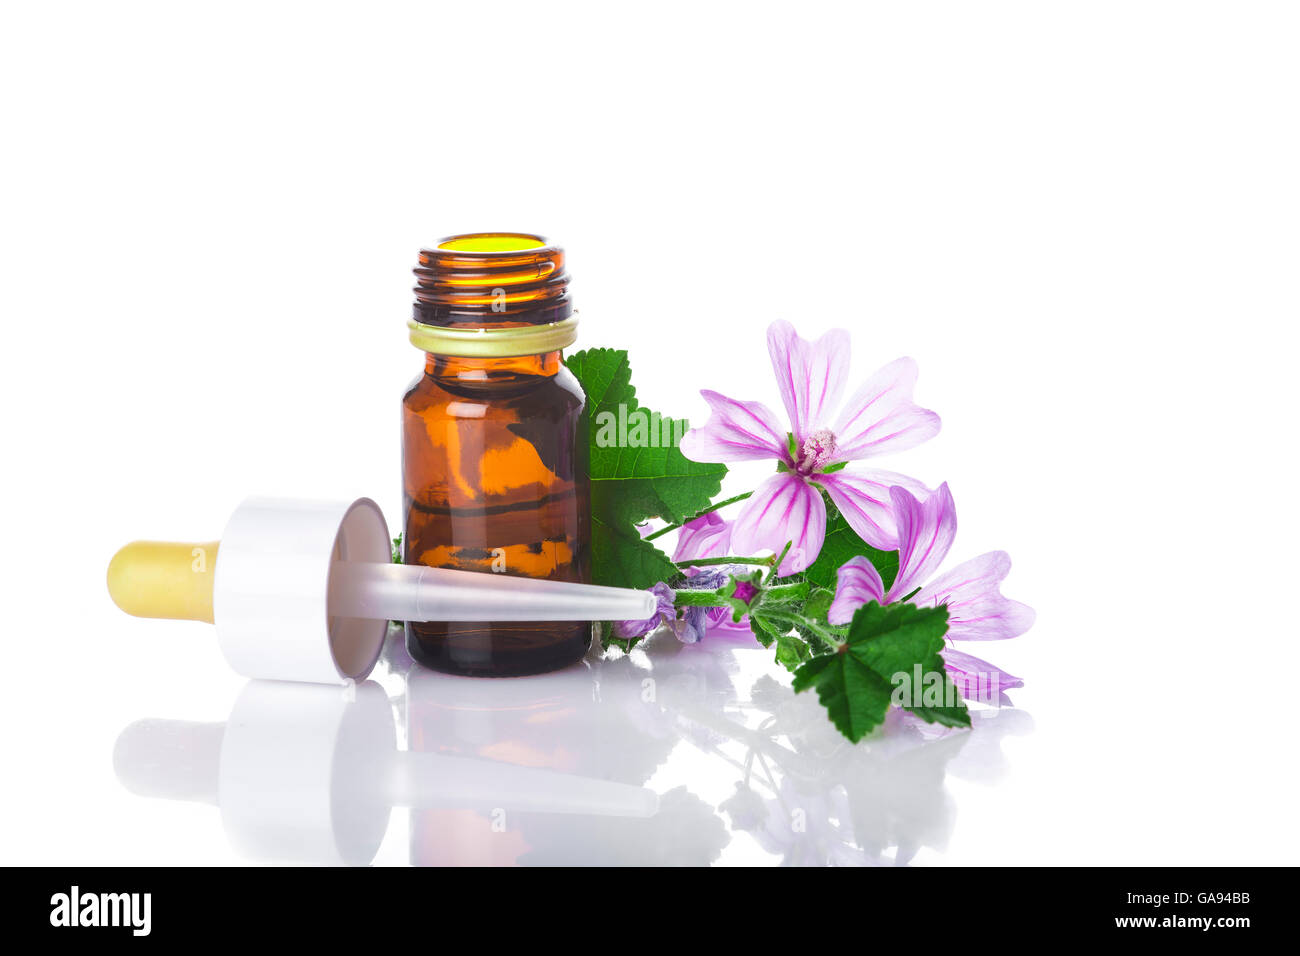 Dropper bottle with mallow malva extract or essential oil isolated on a white background Stock Photo